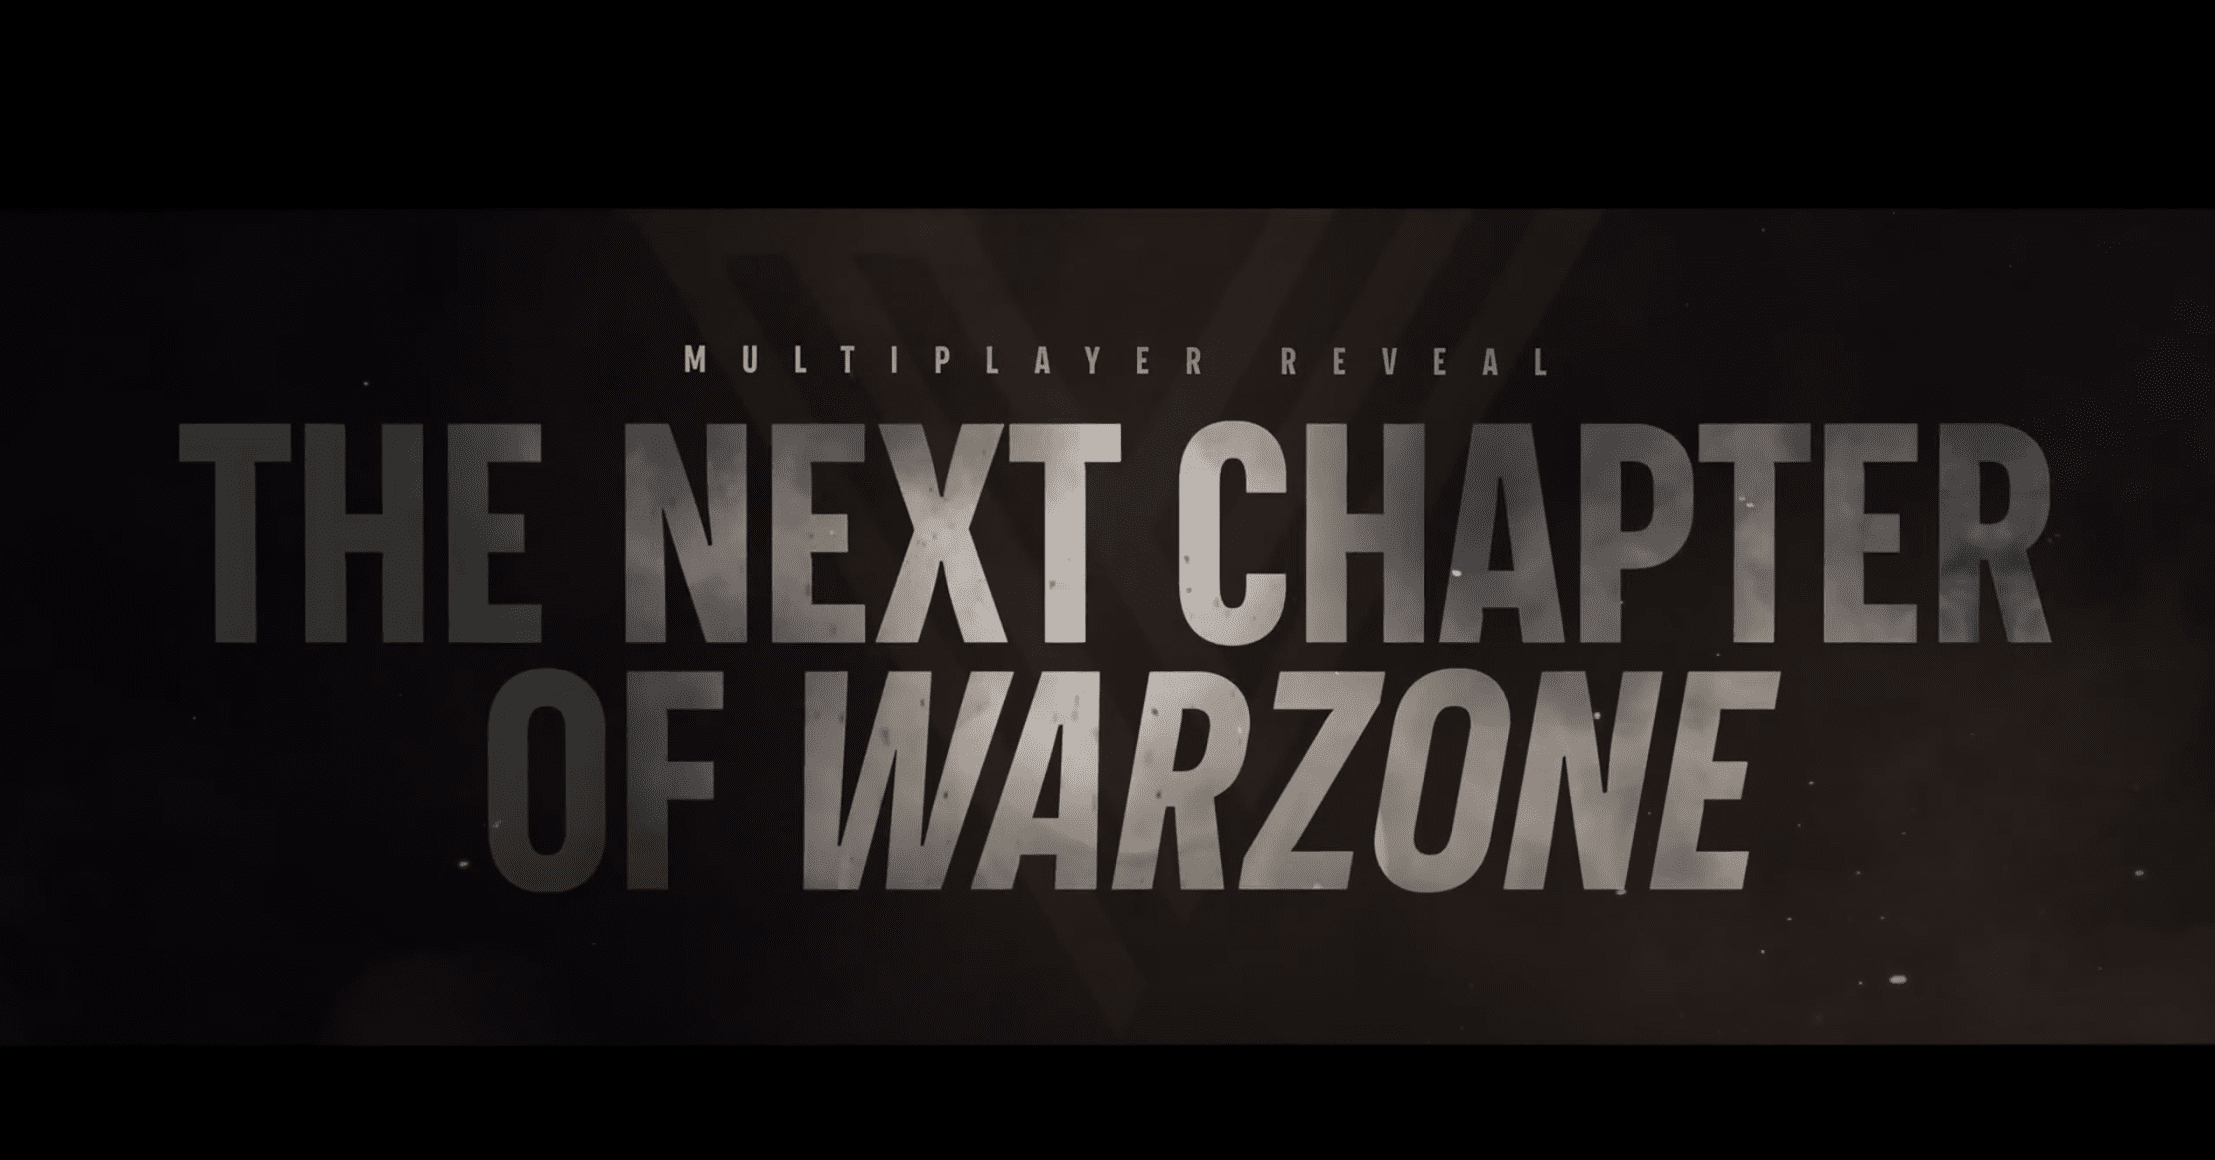 Next chapter of Warzone